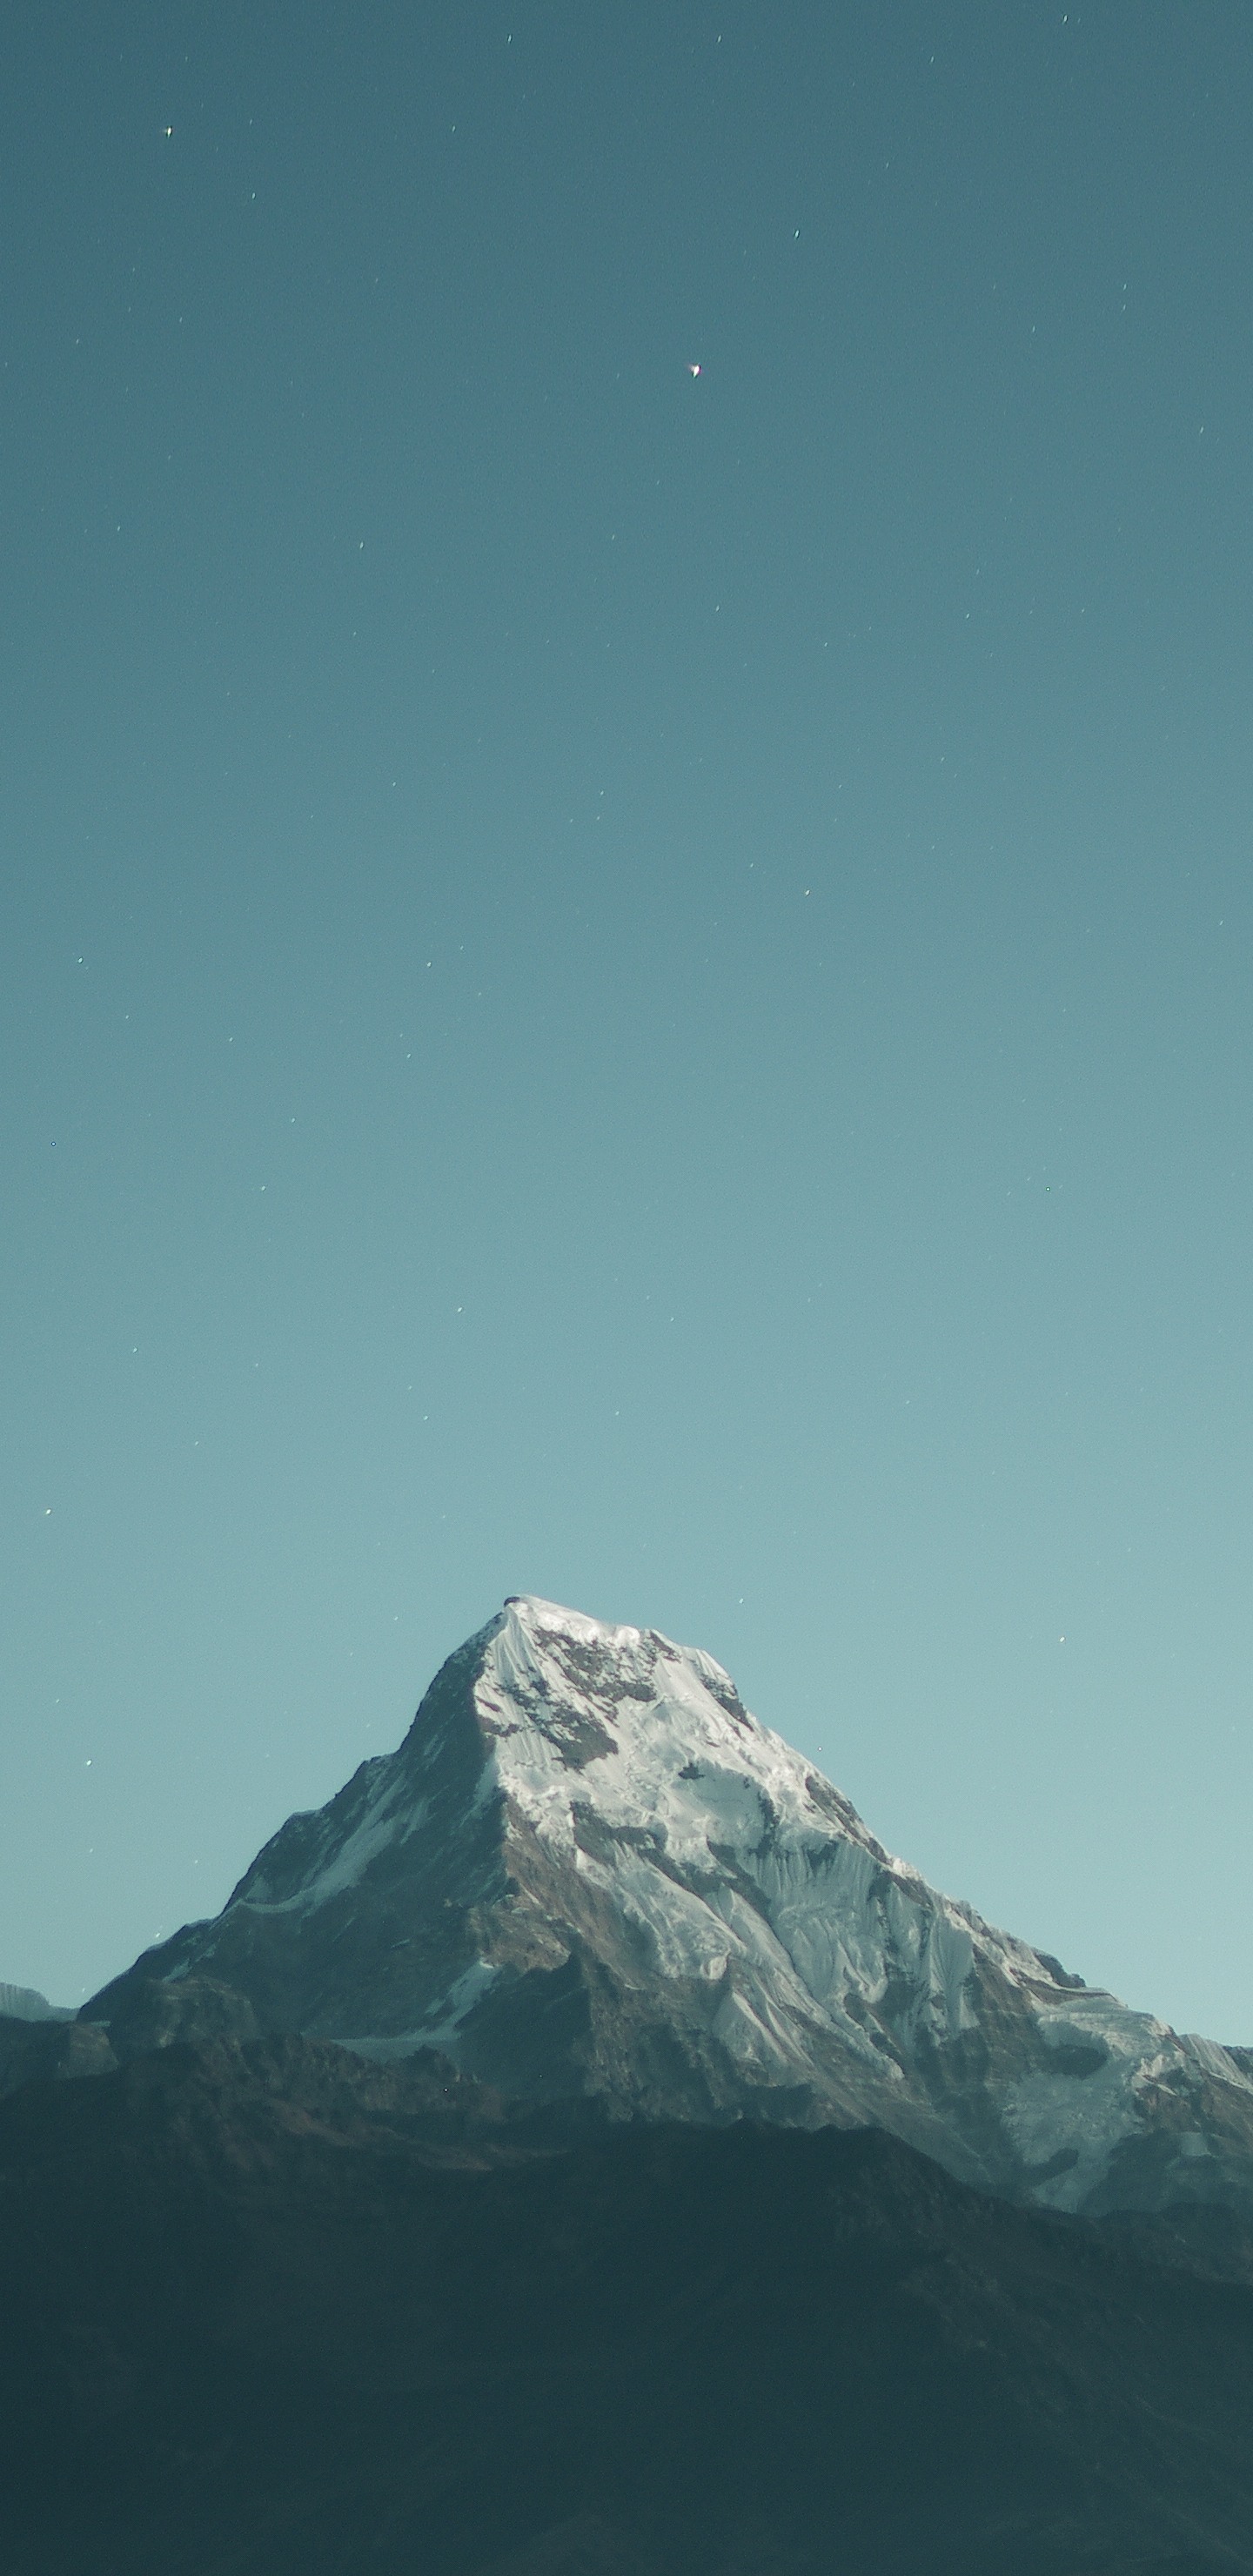 Samsung Galaxy S8 Stock Wallpapers 09 - [1440 x 2960]